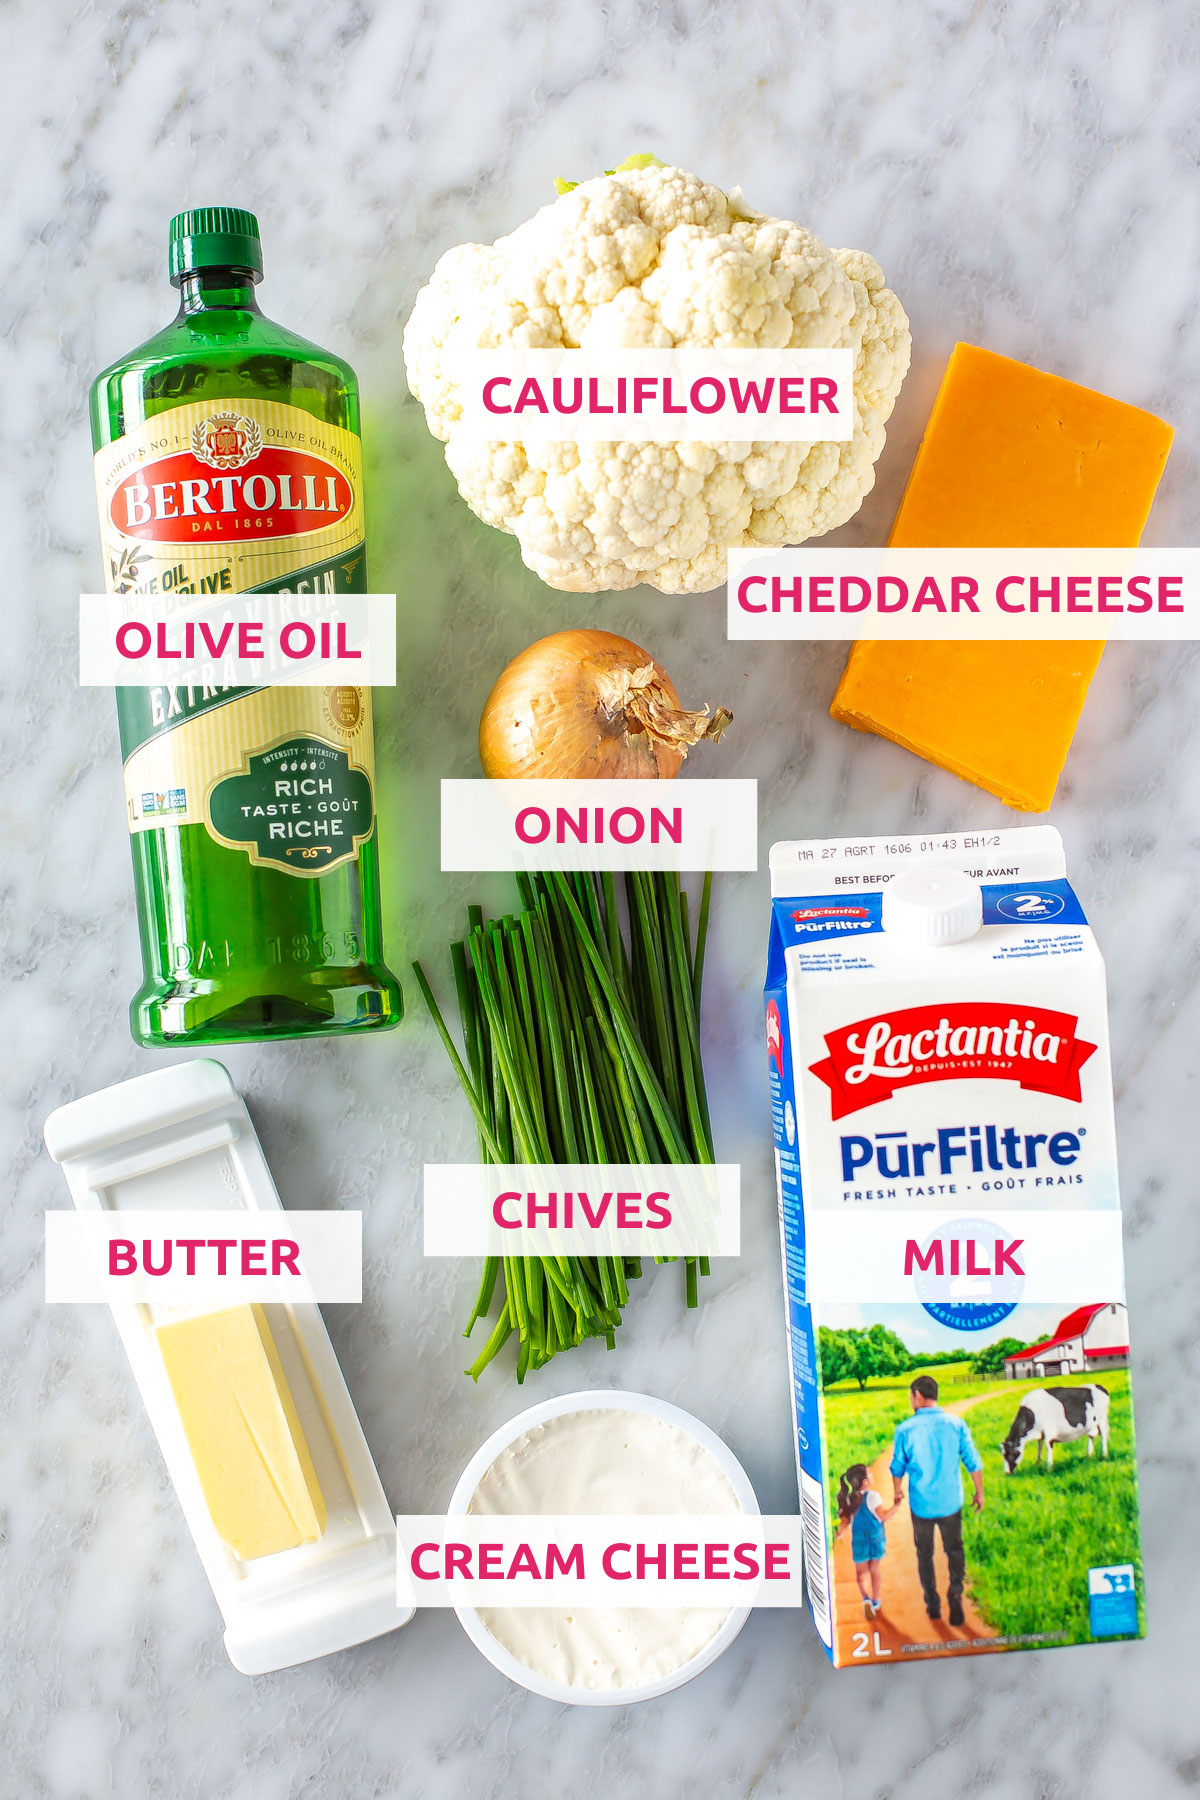 Ingredients for cauliflower mac and cheese: olive oil, cauliflower, cheddar cheese, milk, onion, chives, butter and cream cheese.